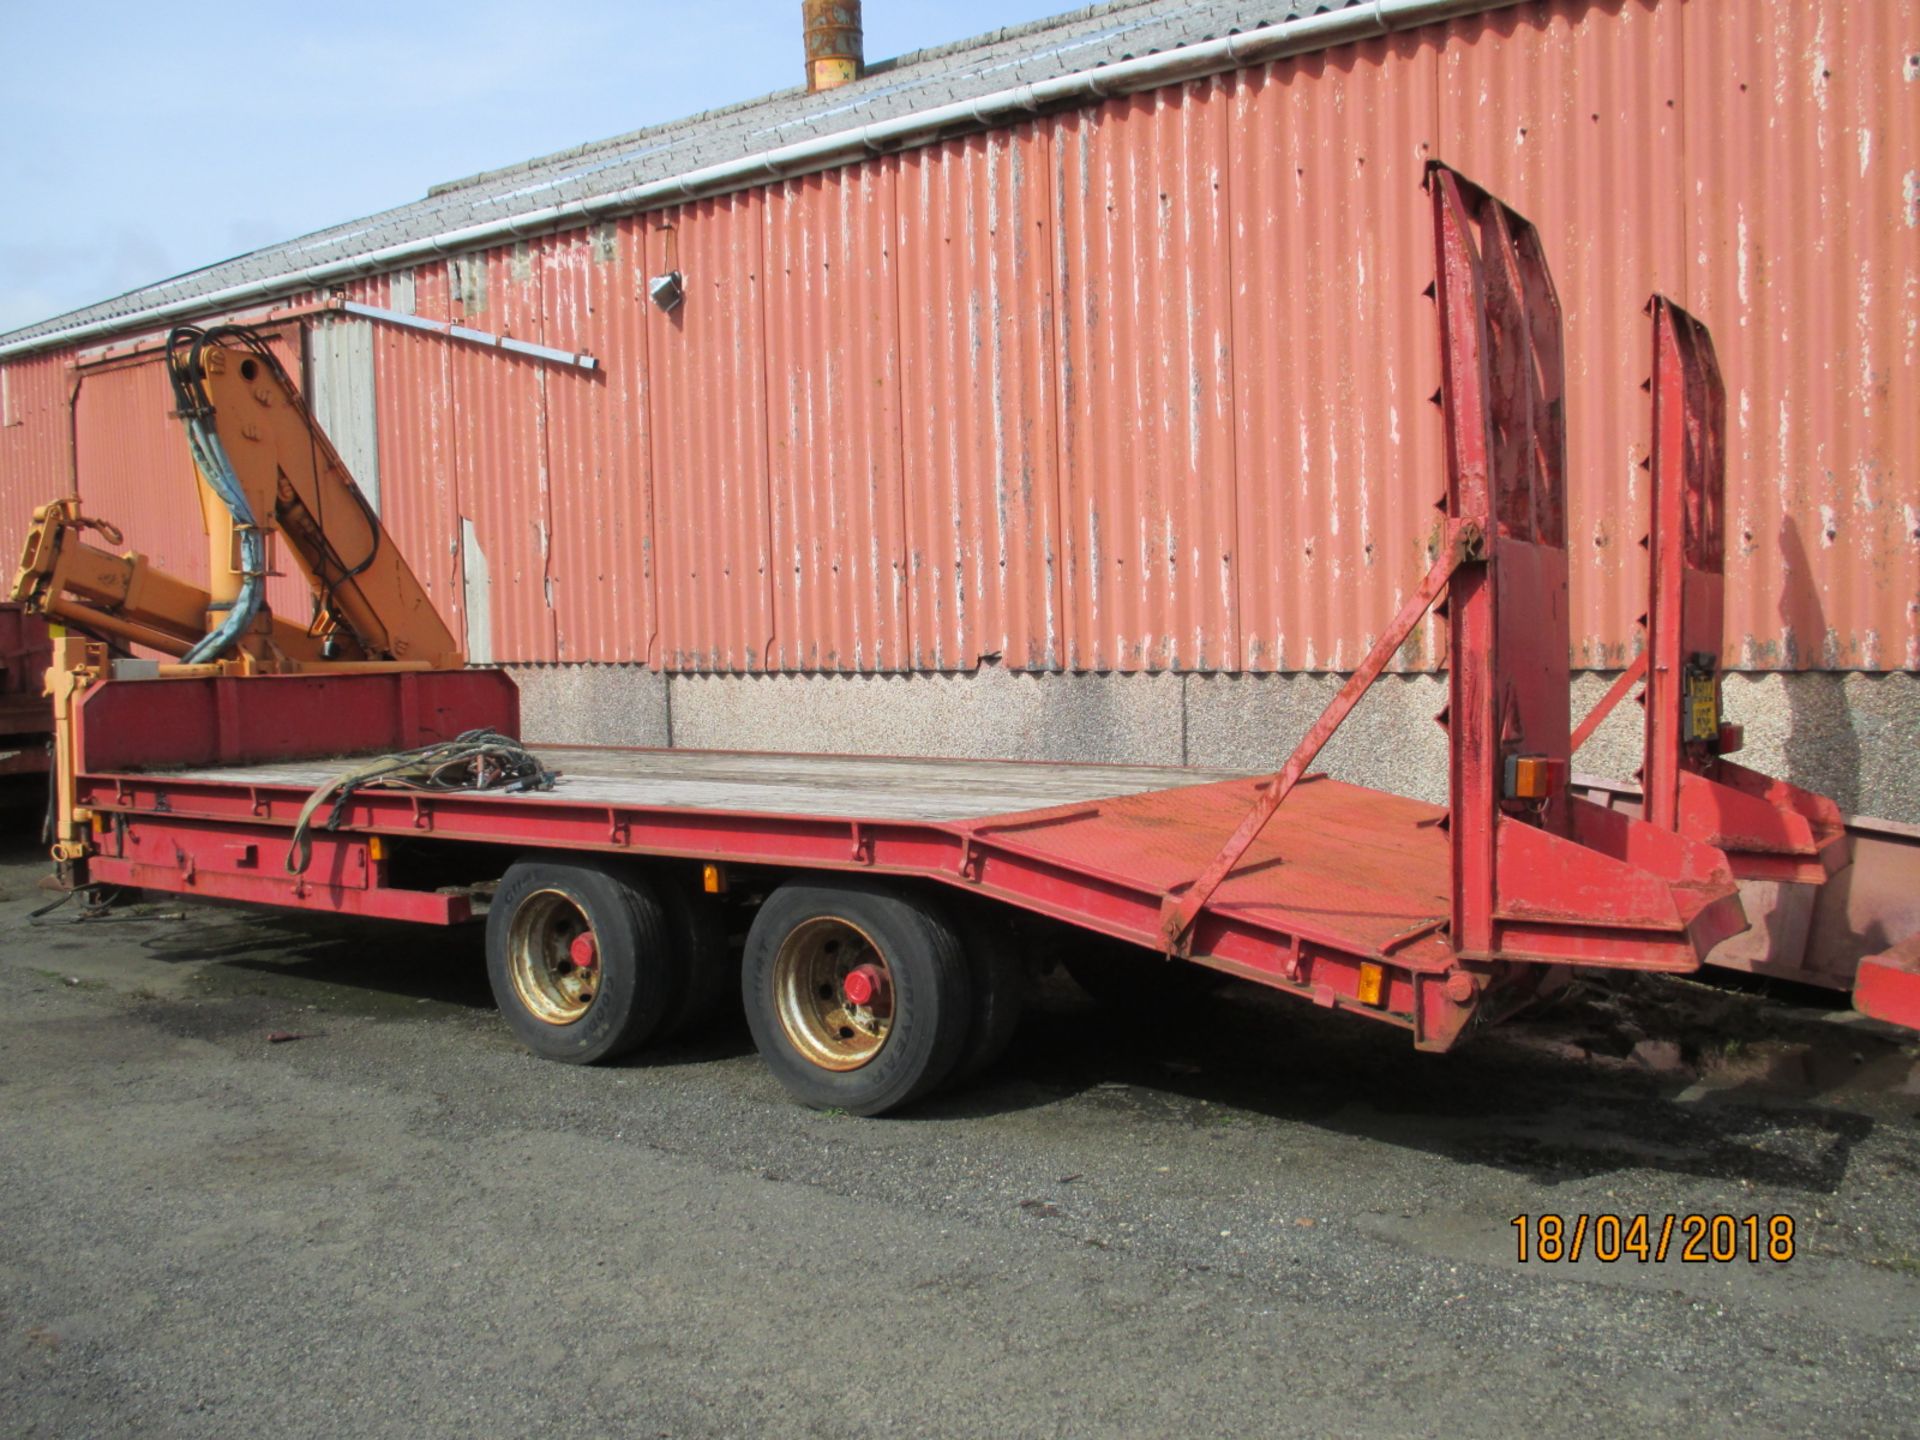 1 No. Chieftain Twin Axle Low Loader Trailer 19 Tonne cw Fitted Atlas Crane - Image 2 of 2